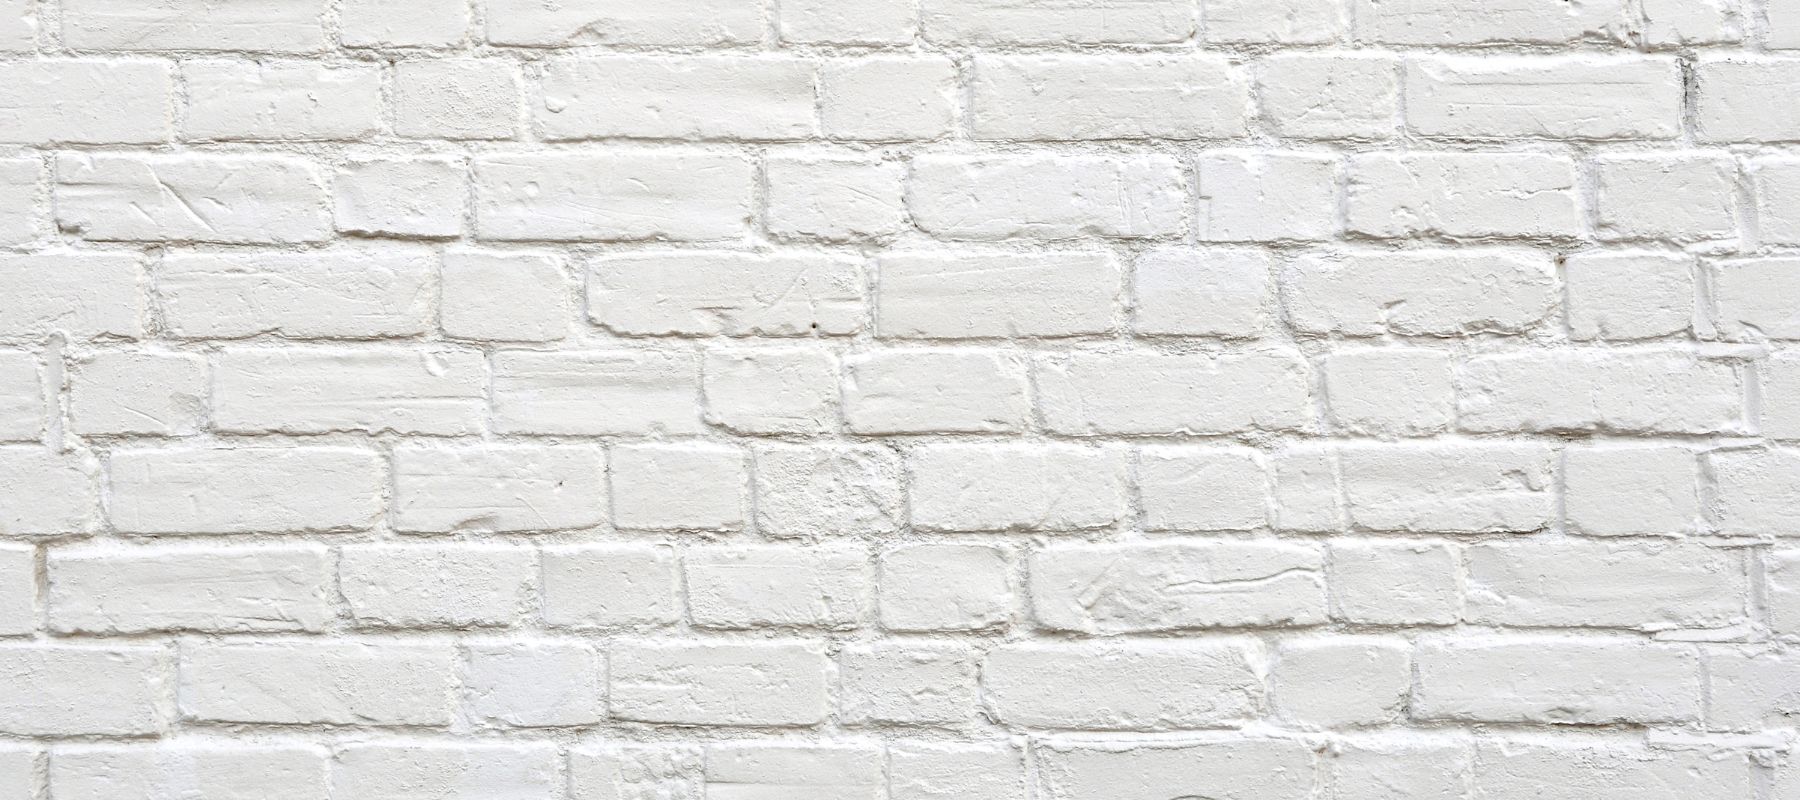 white paint on a brick wall